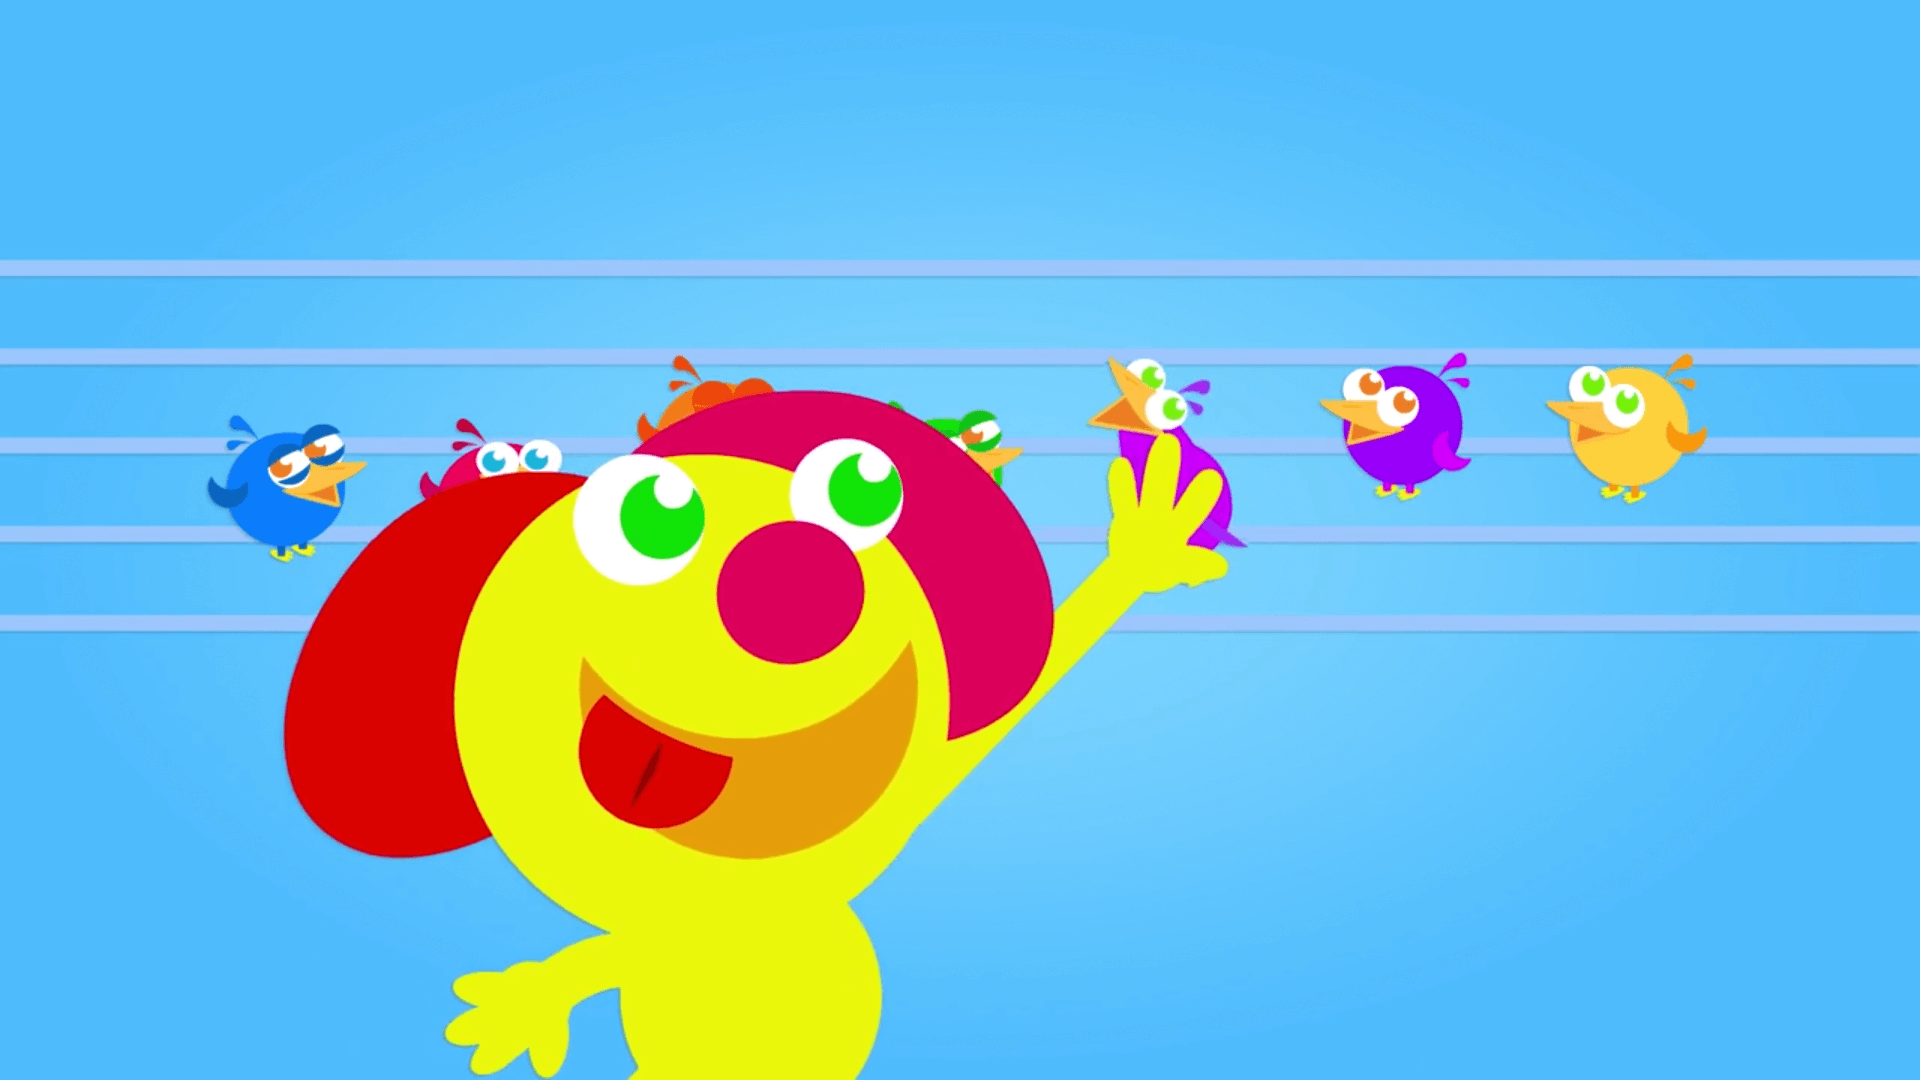 Caesar playing music with birds on wires, mary had a little lamb, row row row your boat in episode of the kneebouncers show on babyfirst